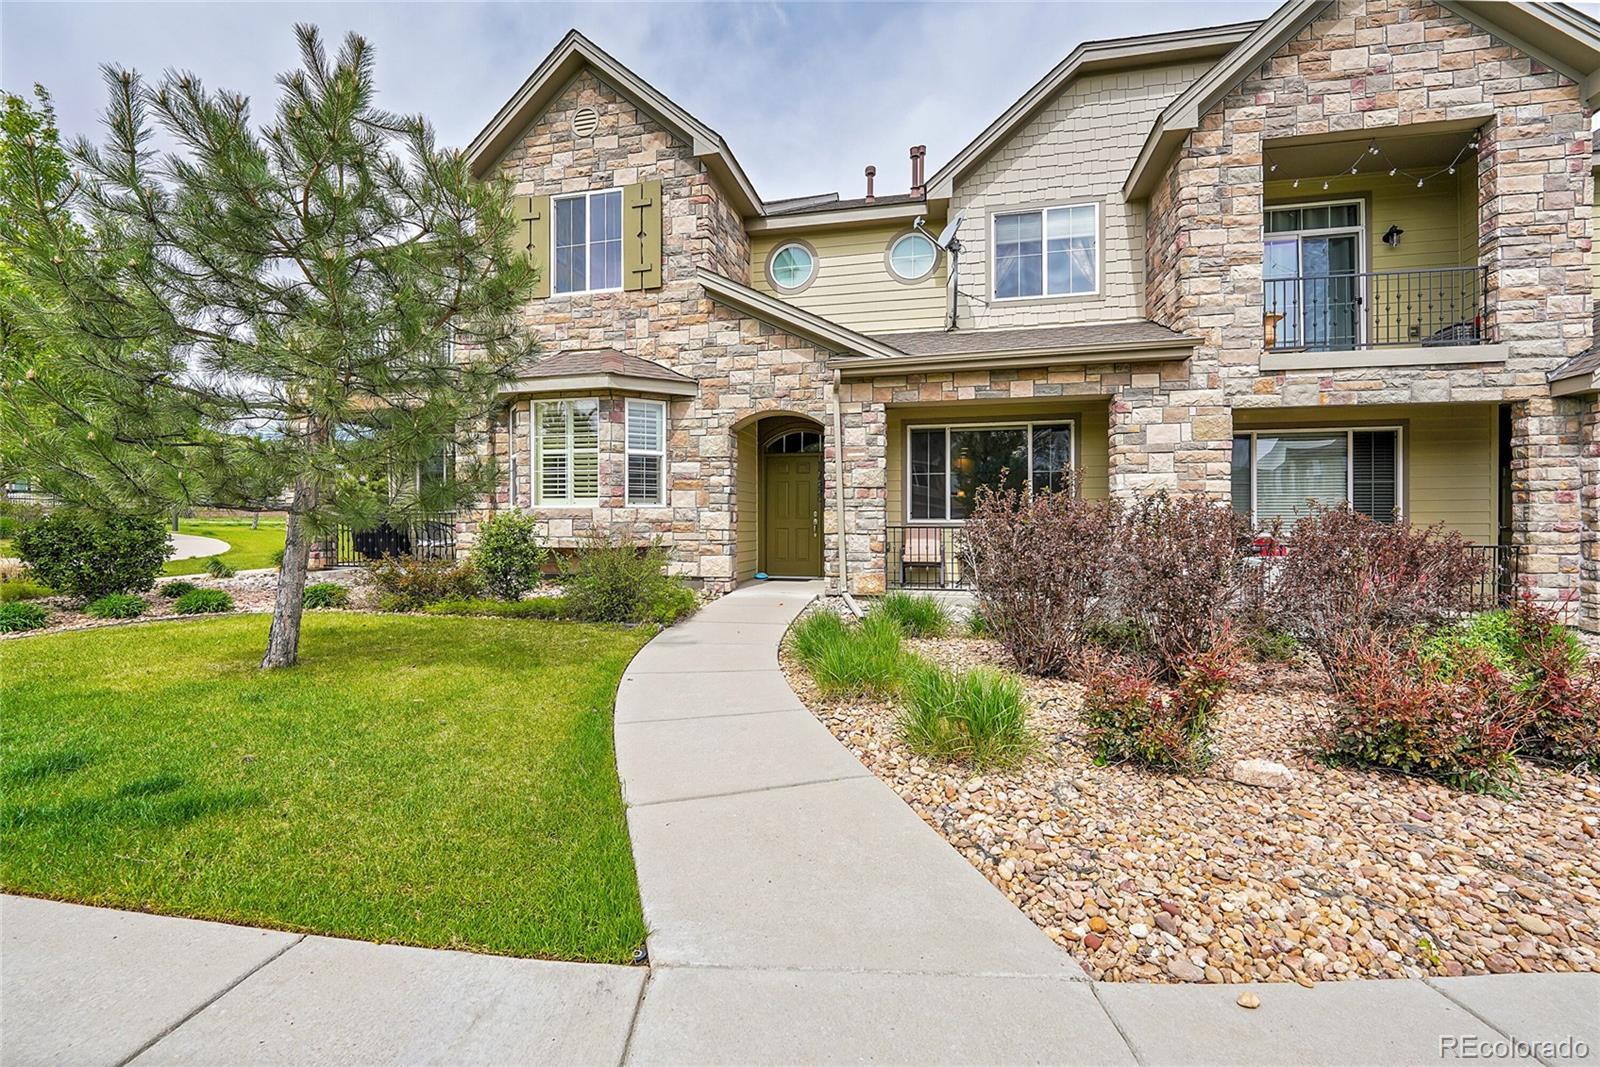 Photo one of 15422 W 66Th W Ave # C Arvada CO 80007 | MLS 7776855